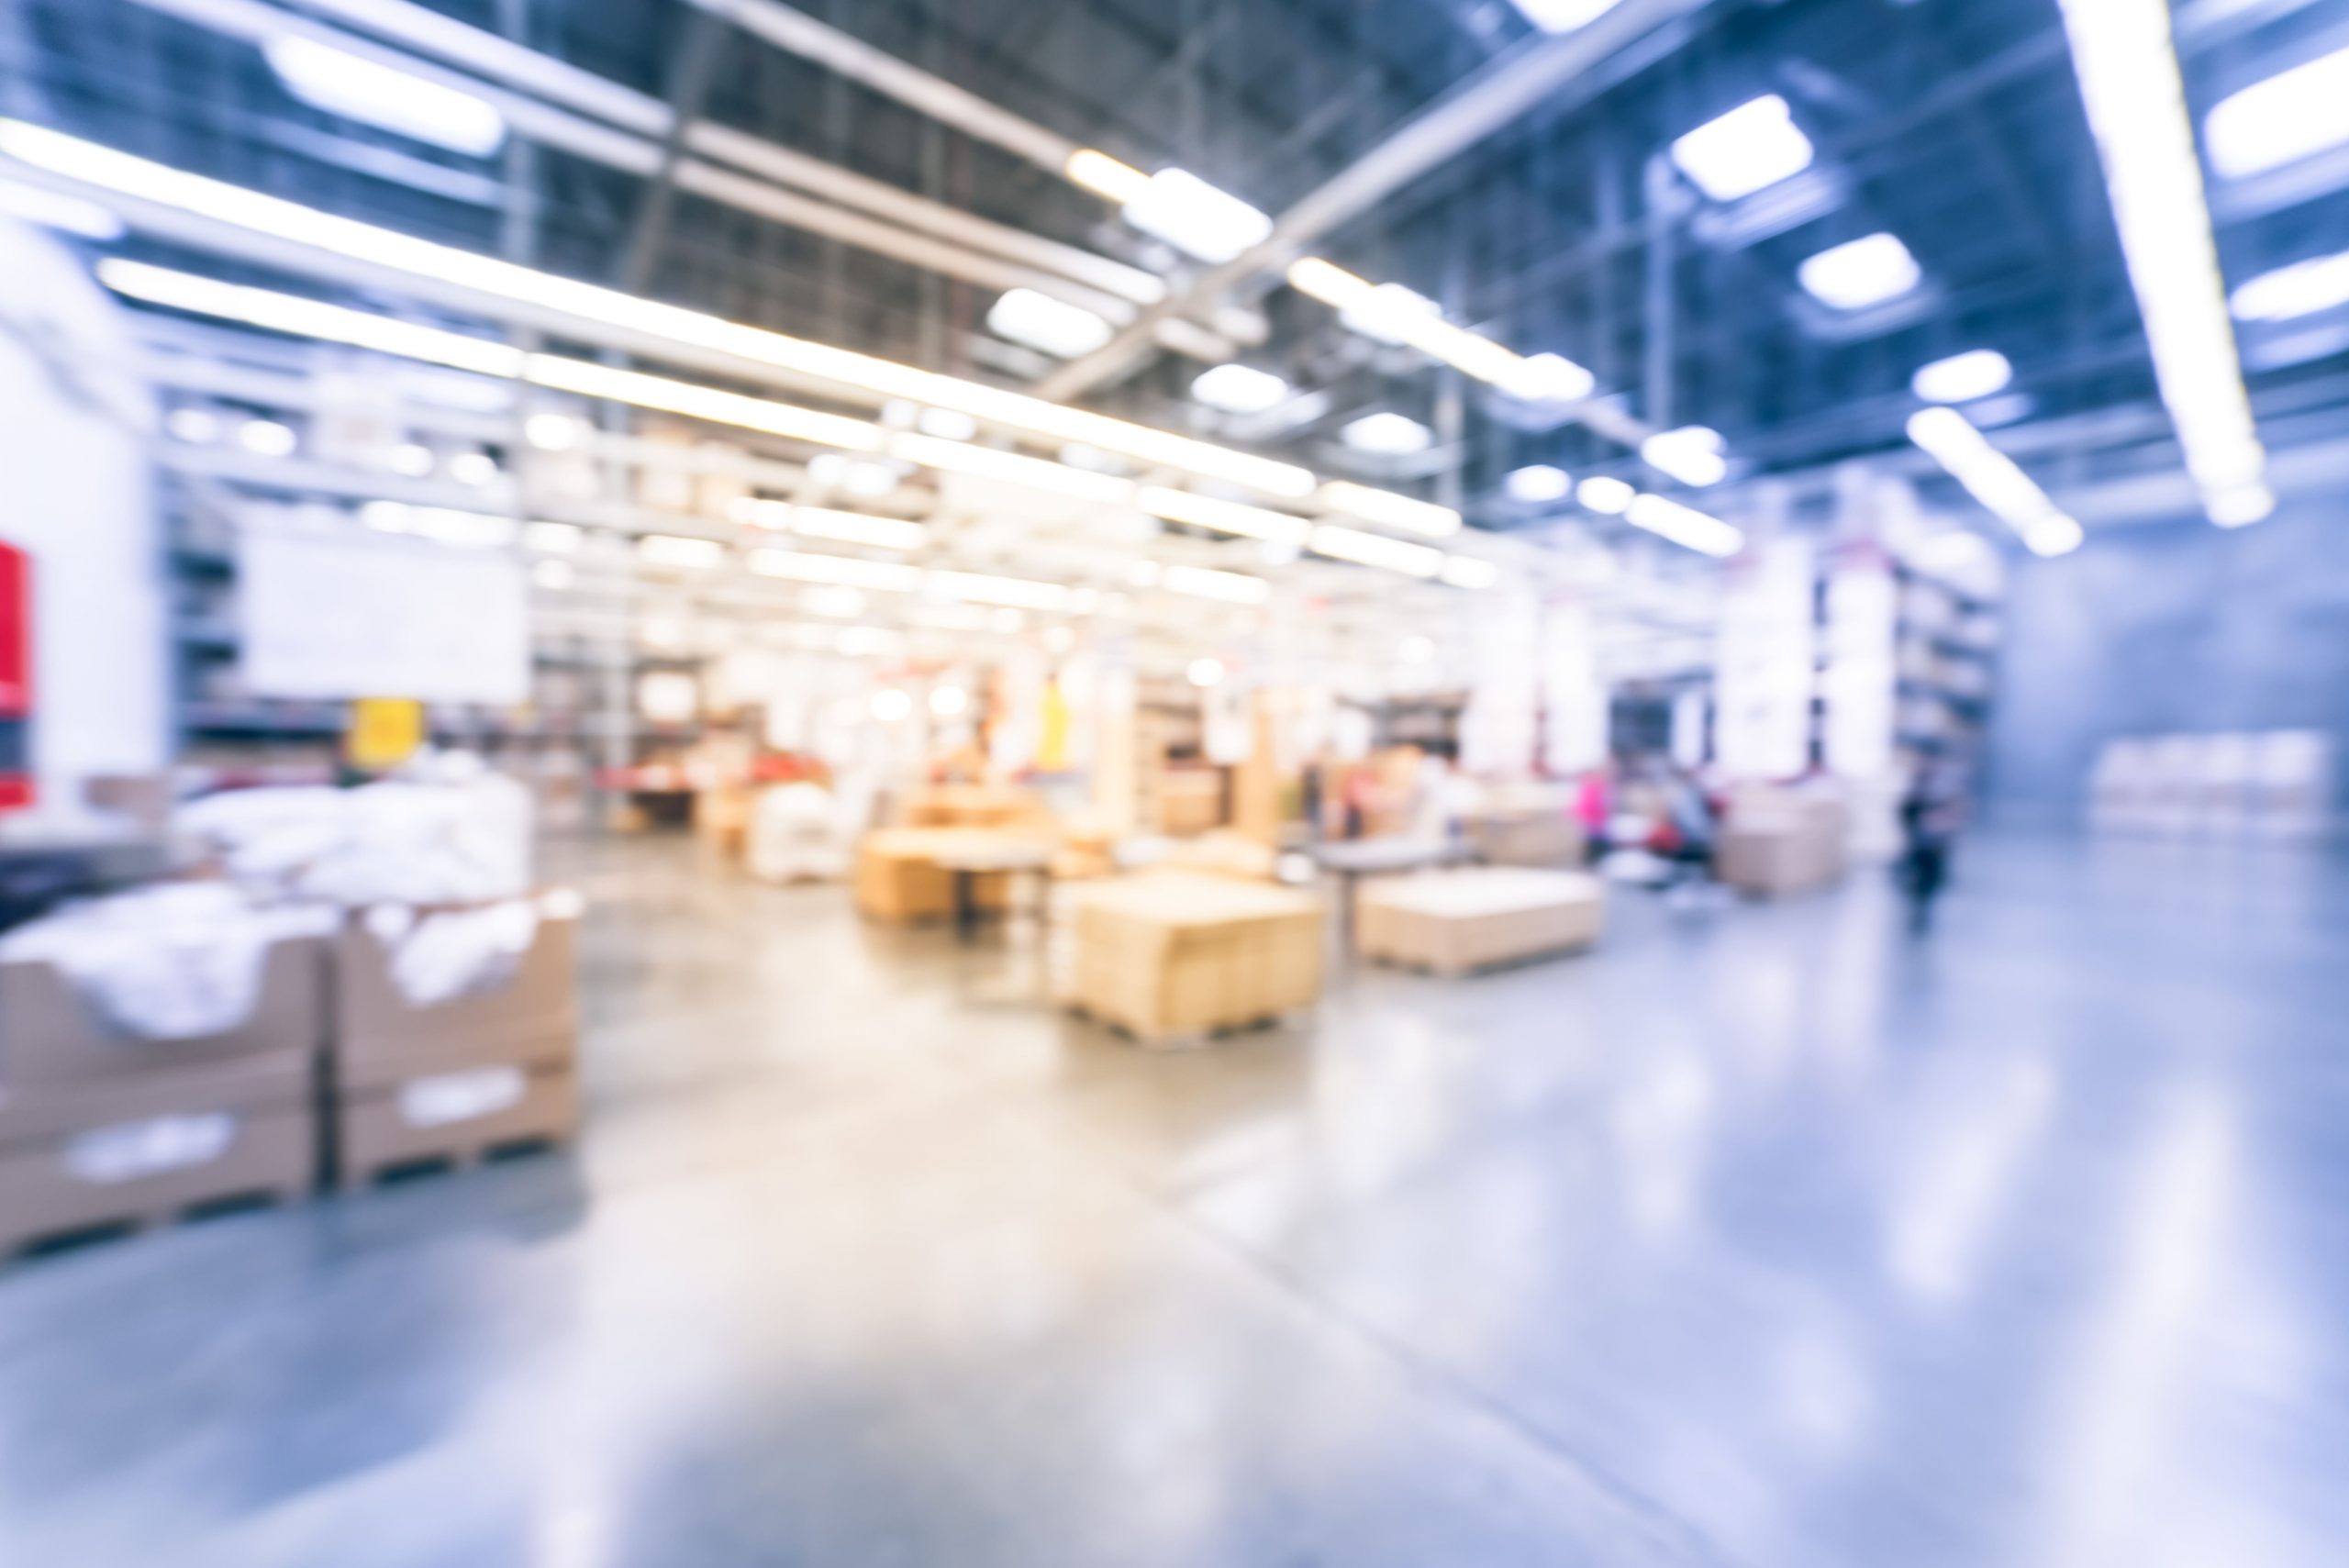 Blurred image of a large warehouse with rows of stacked products